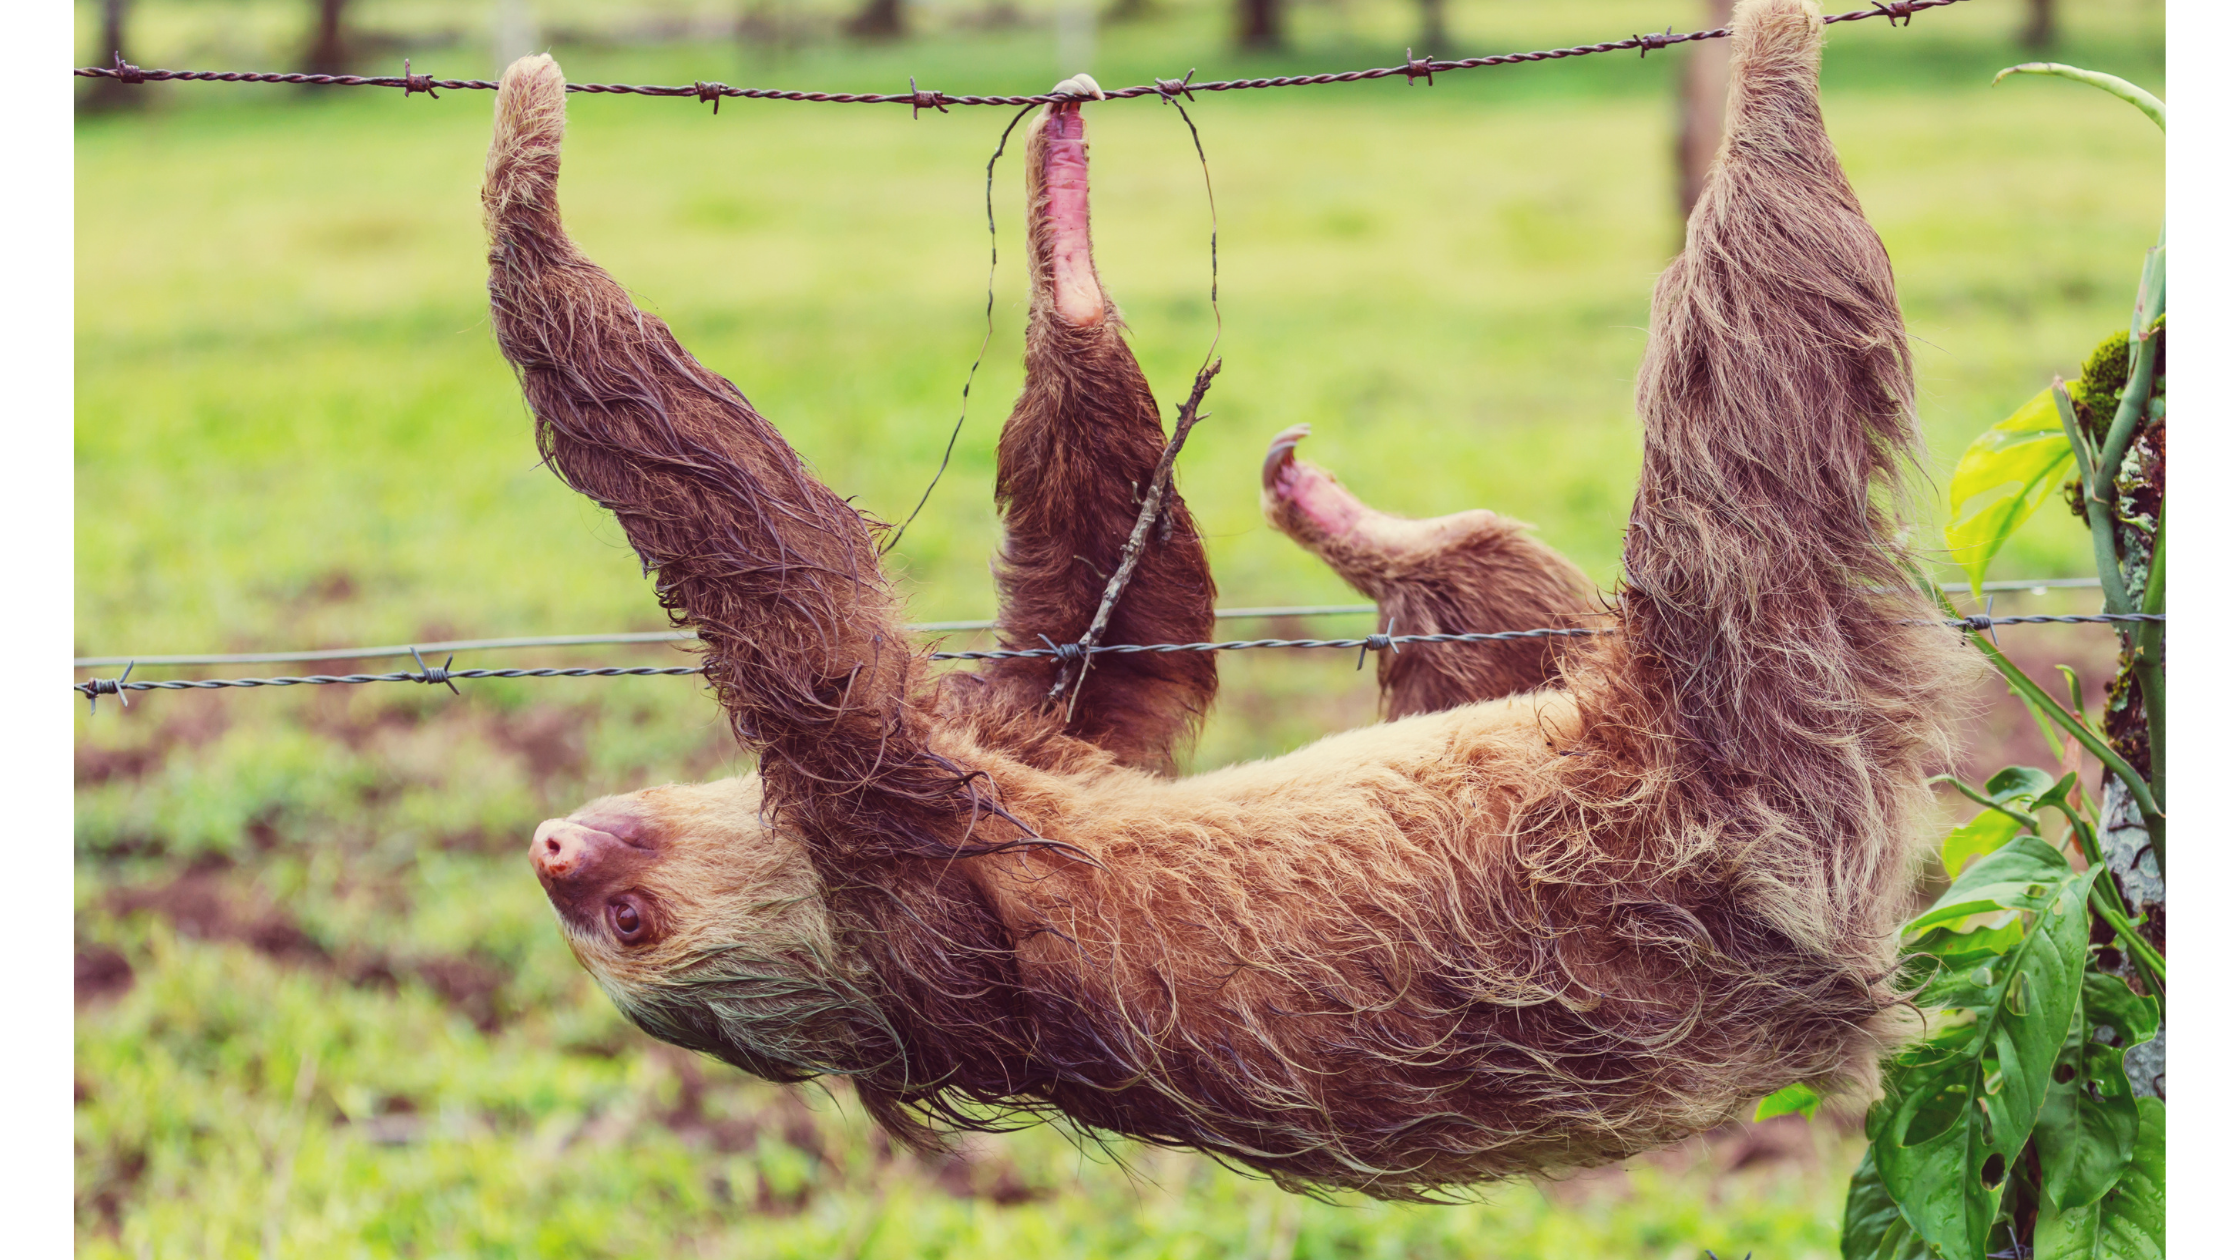 sloth hanging from a fence